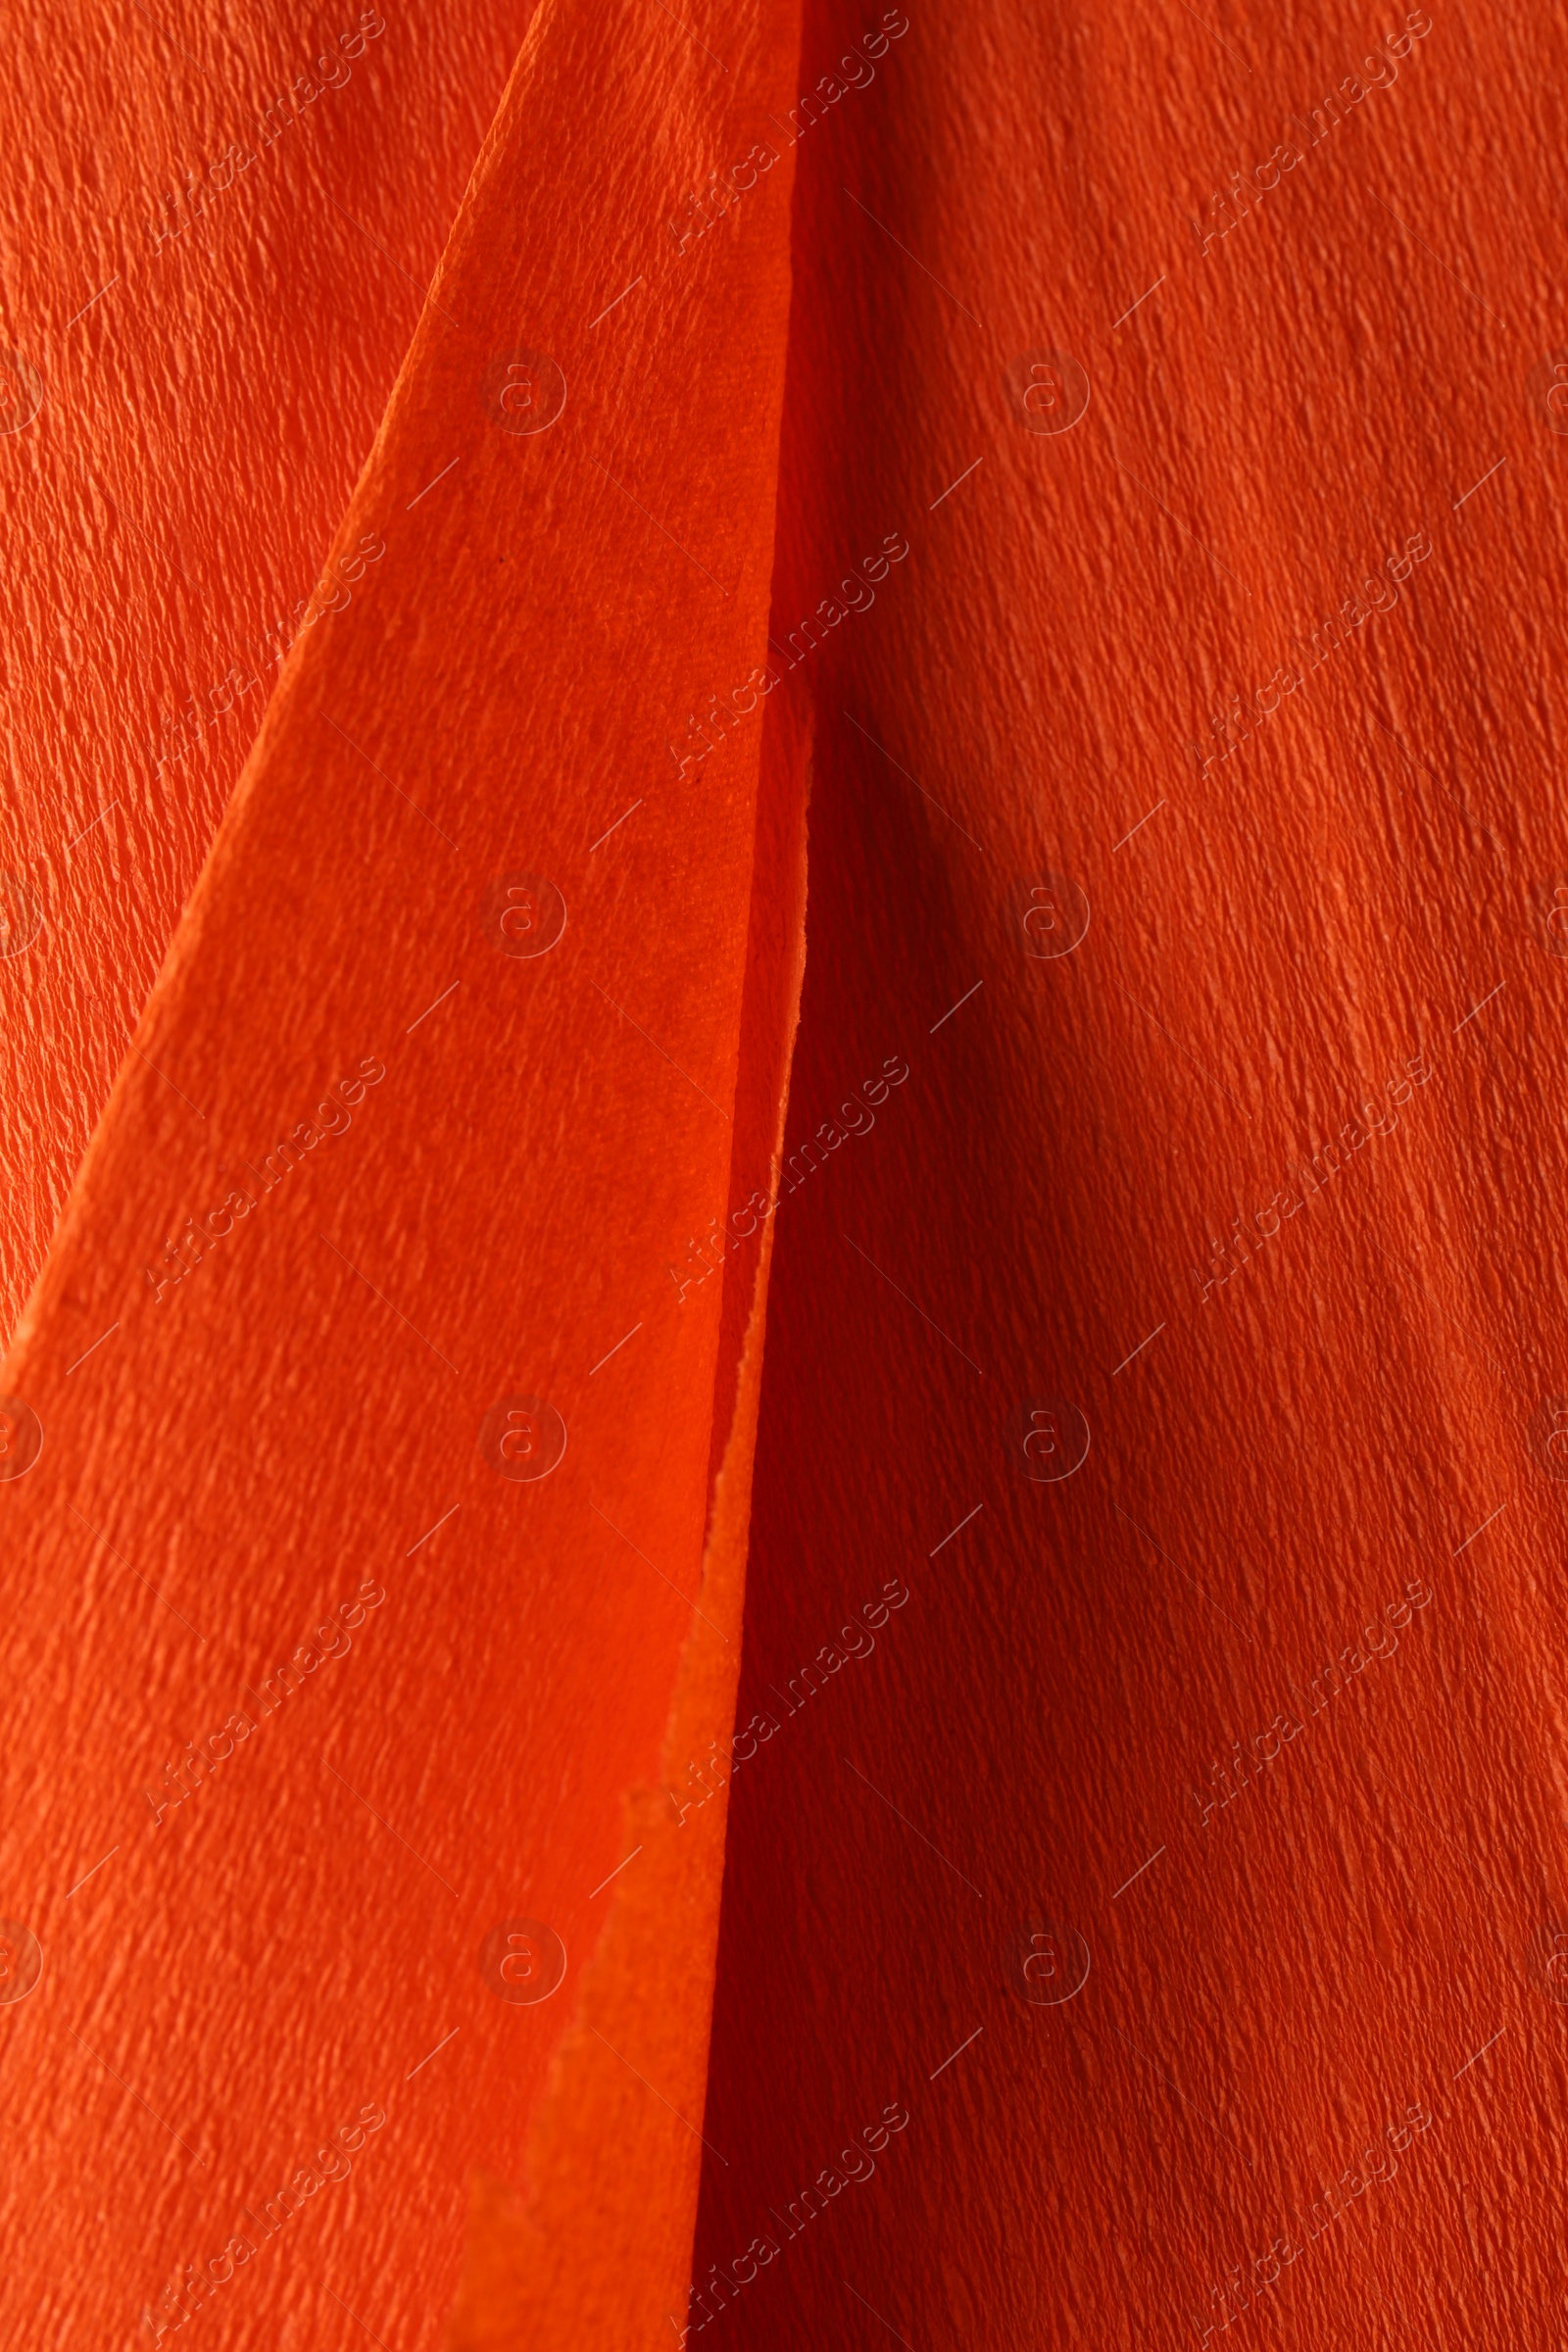 Photo of Orange textured material as background, closeup view